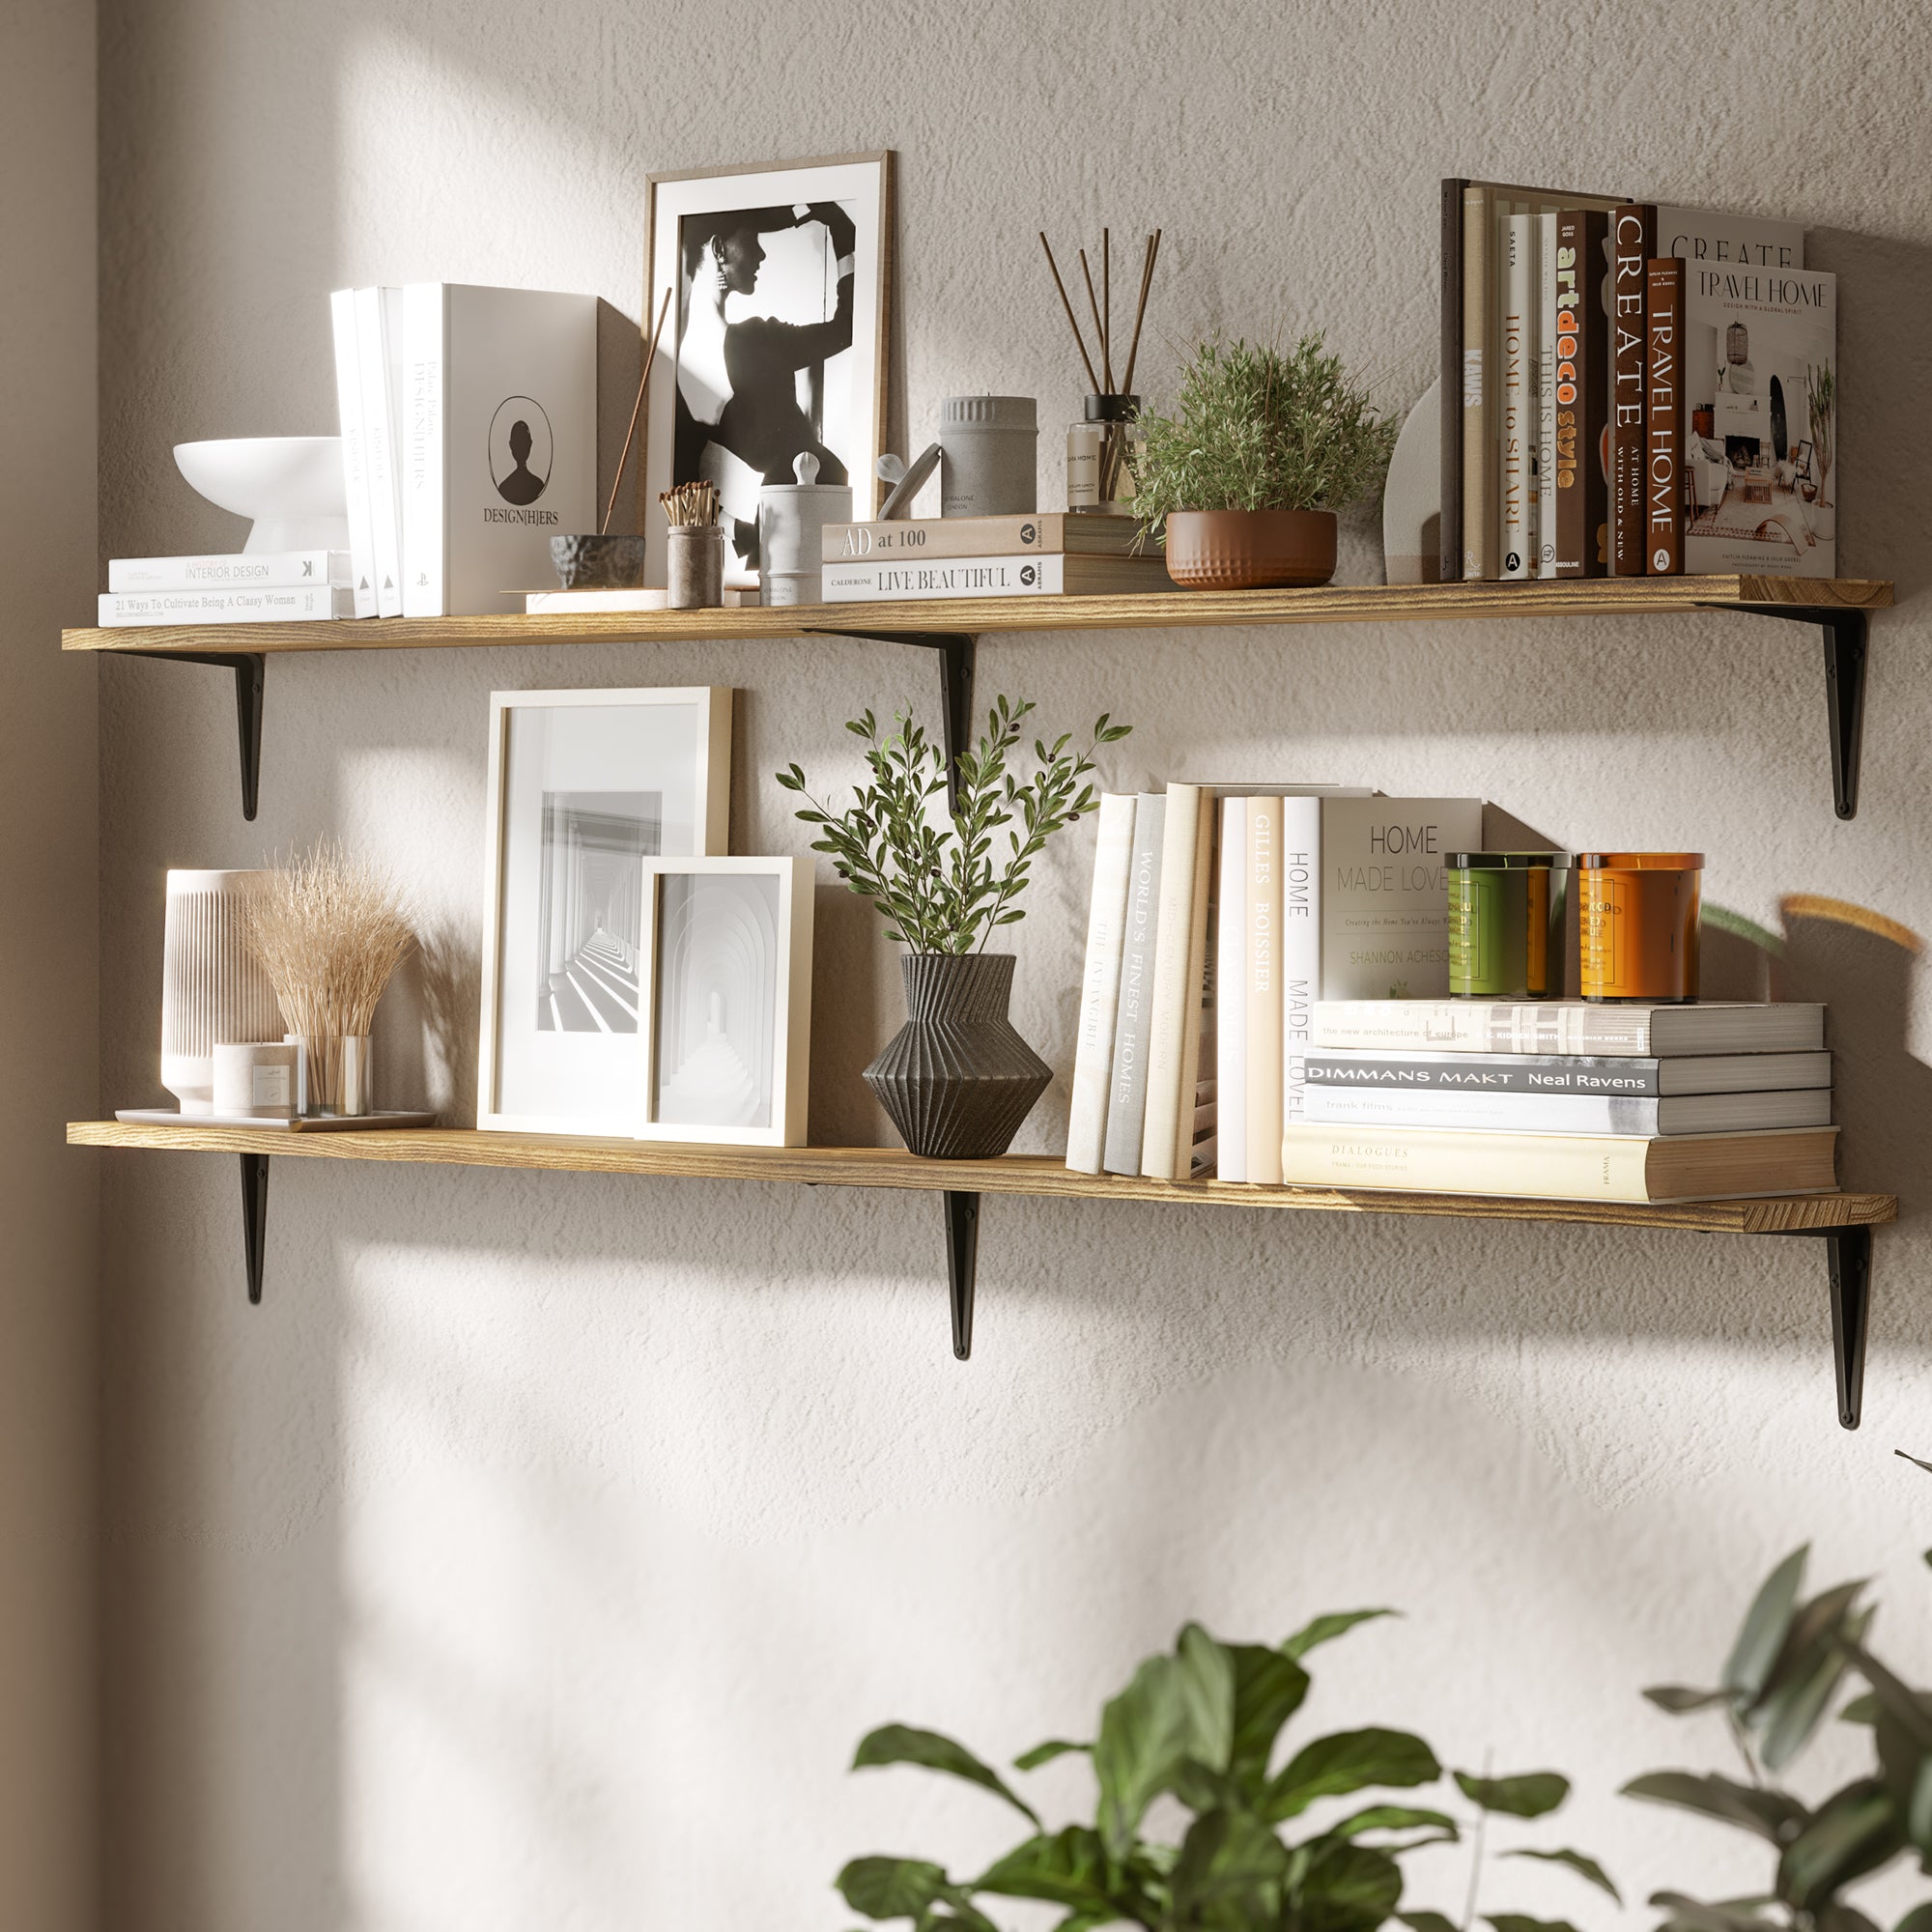 Living room with floating shelves supported by black metal brackets, perfect for stylish storage.